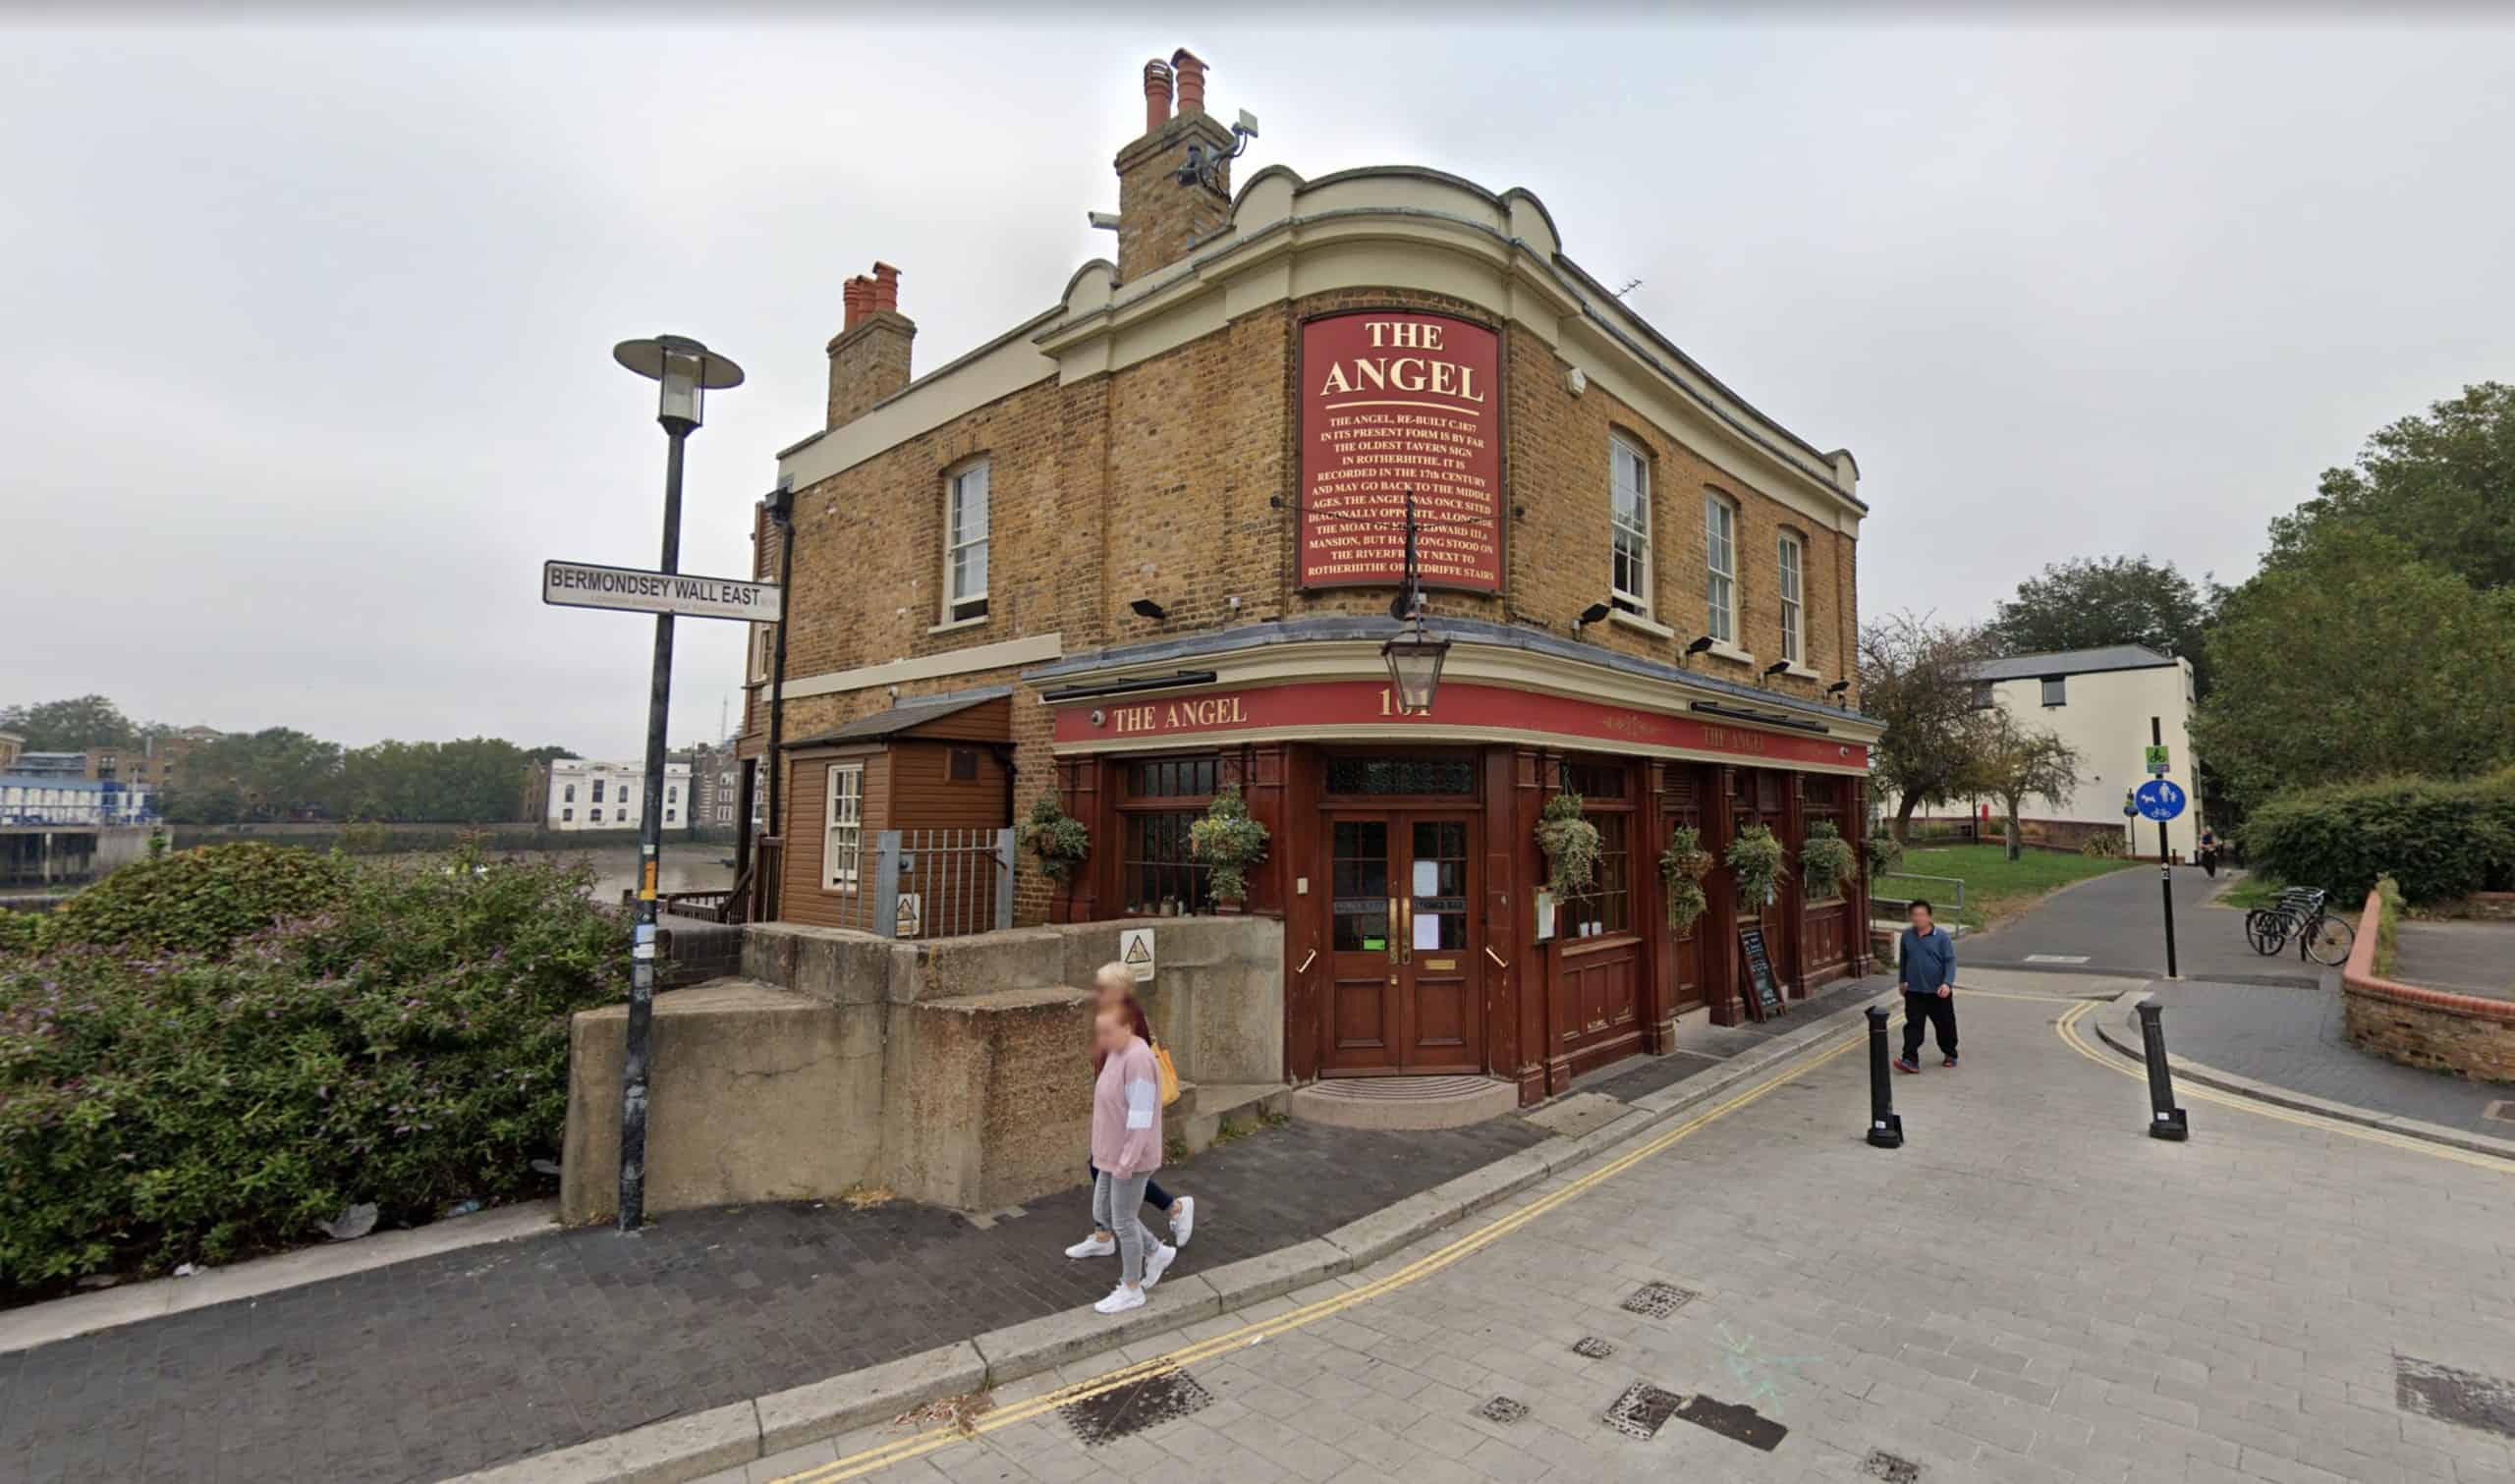 The Angel in Rotherhithe (Image: Google Maps)